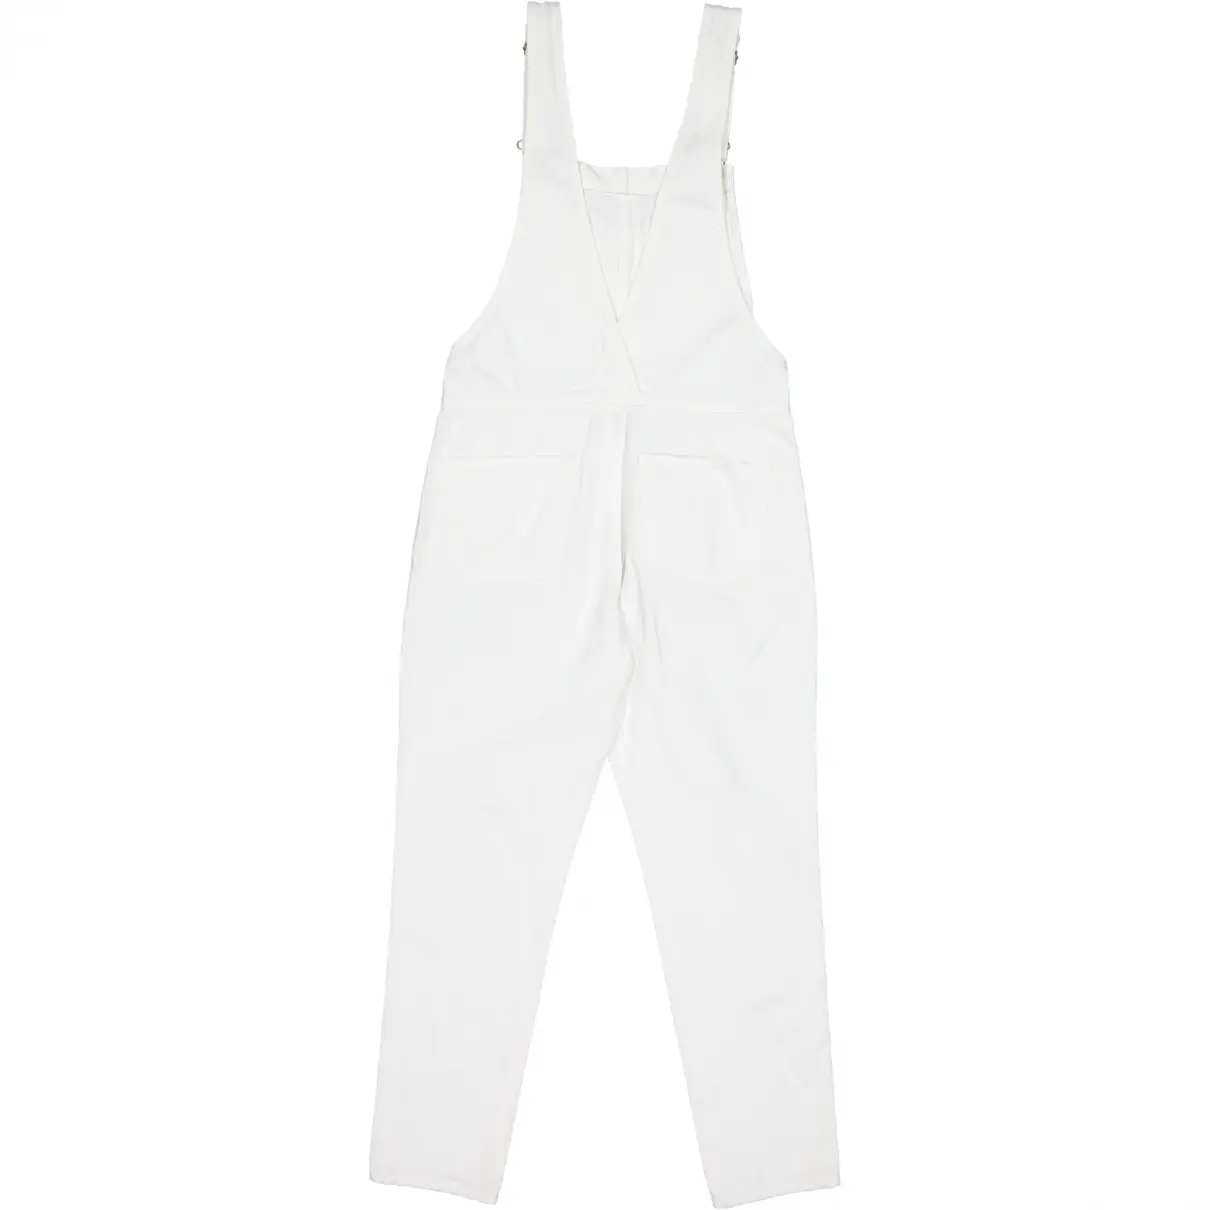 Ag Adriano Goldschmied Jumpsuit for sale